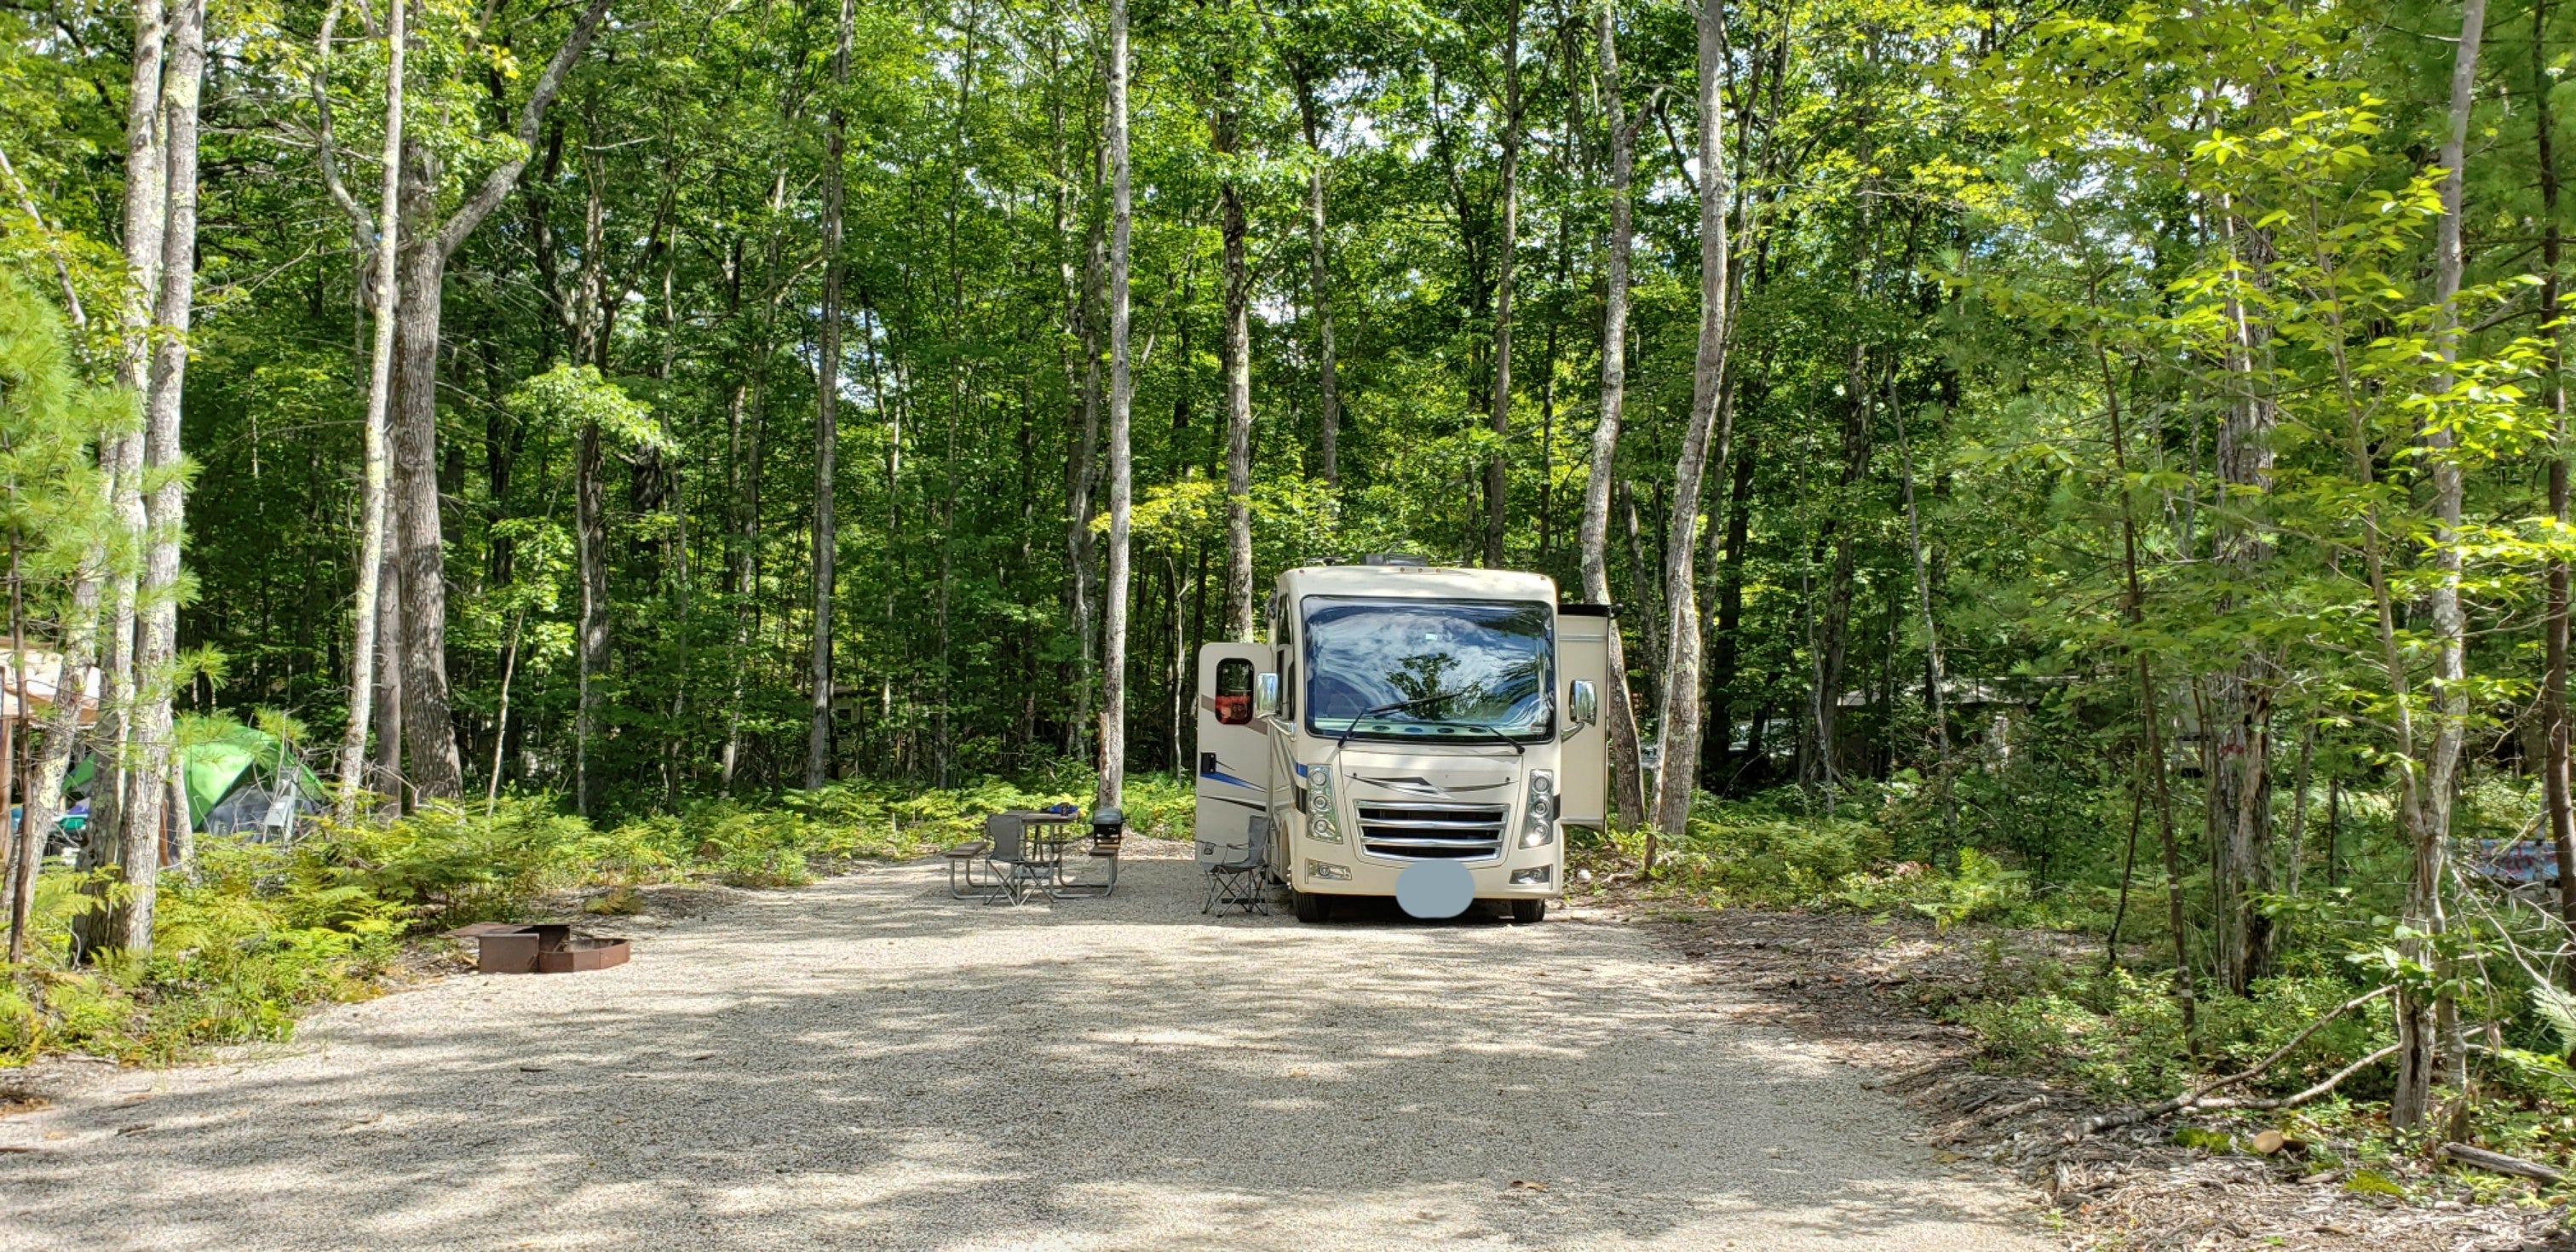 Rv site occupied with large RV